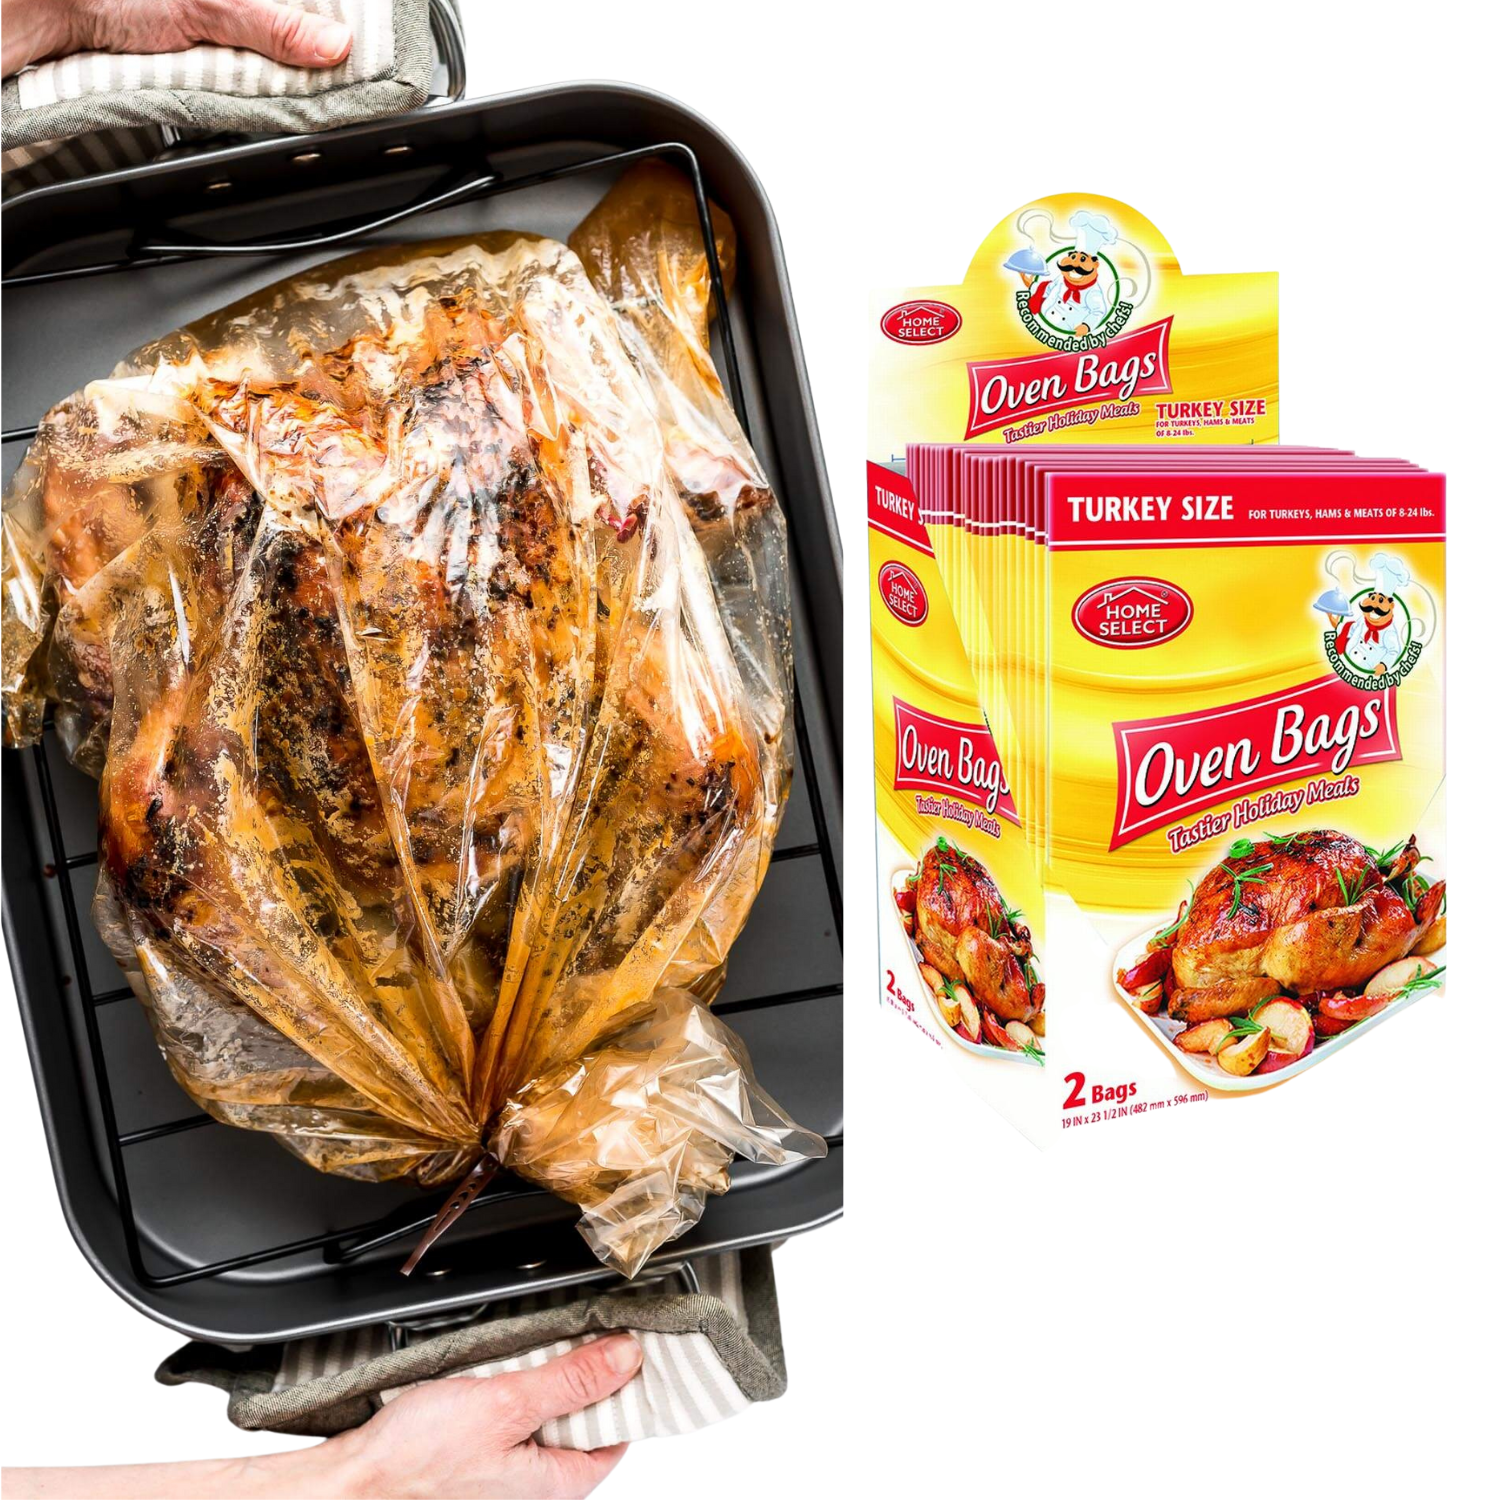 1 Pack Big Chef Turkey Size Oven Bags Great for Cooking, Roasting